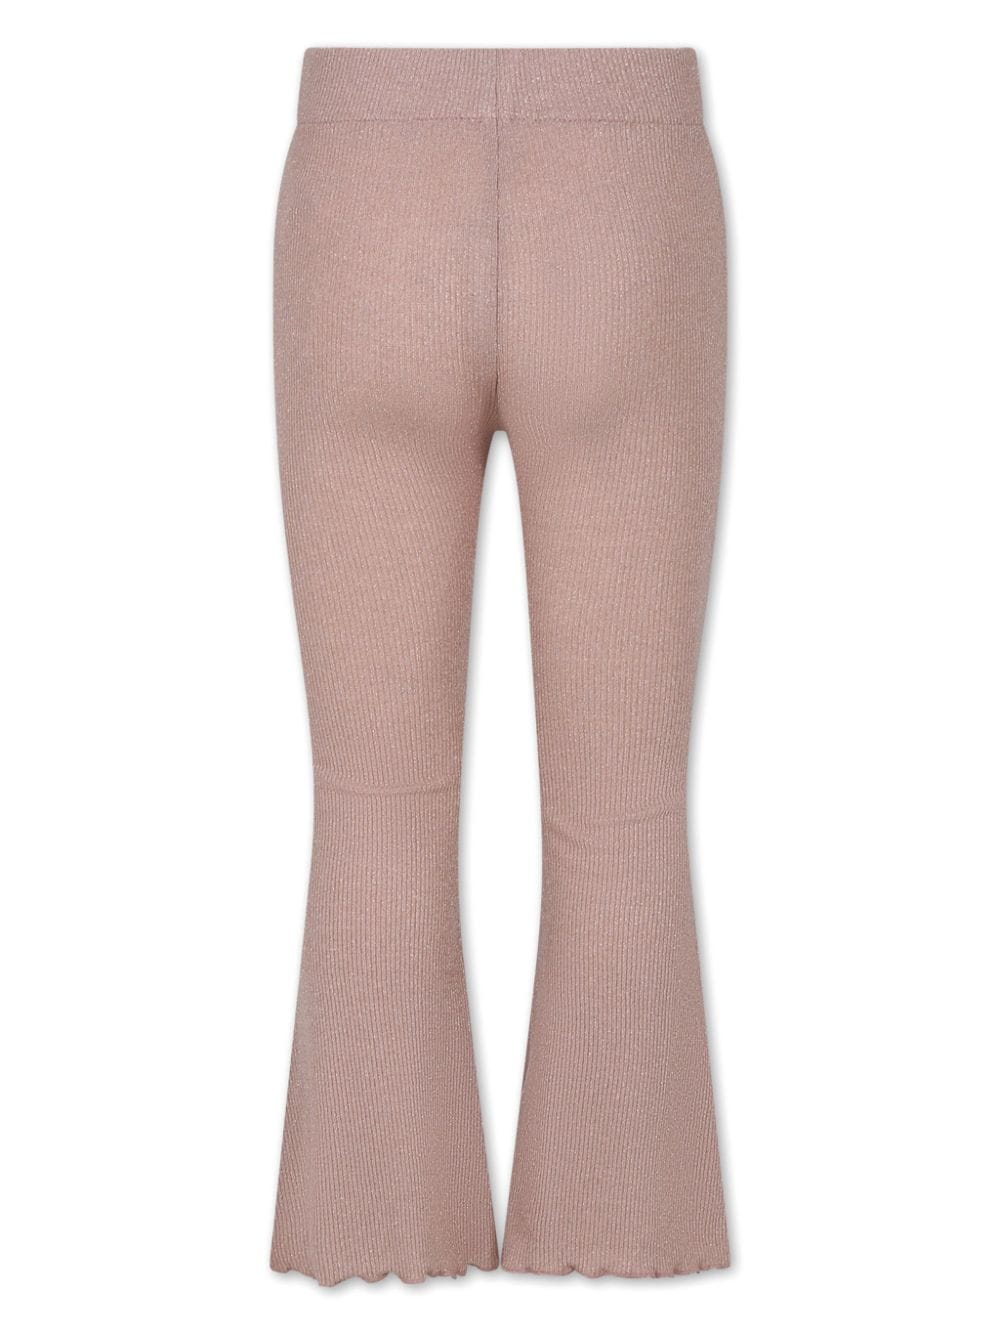 Image 2 of Caffe' D'orzo metallic-knit flared-leg trousers